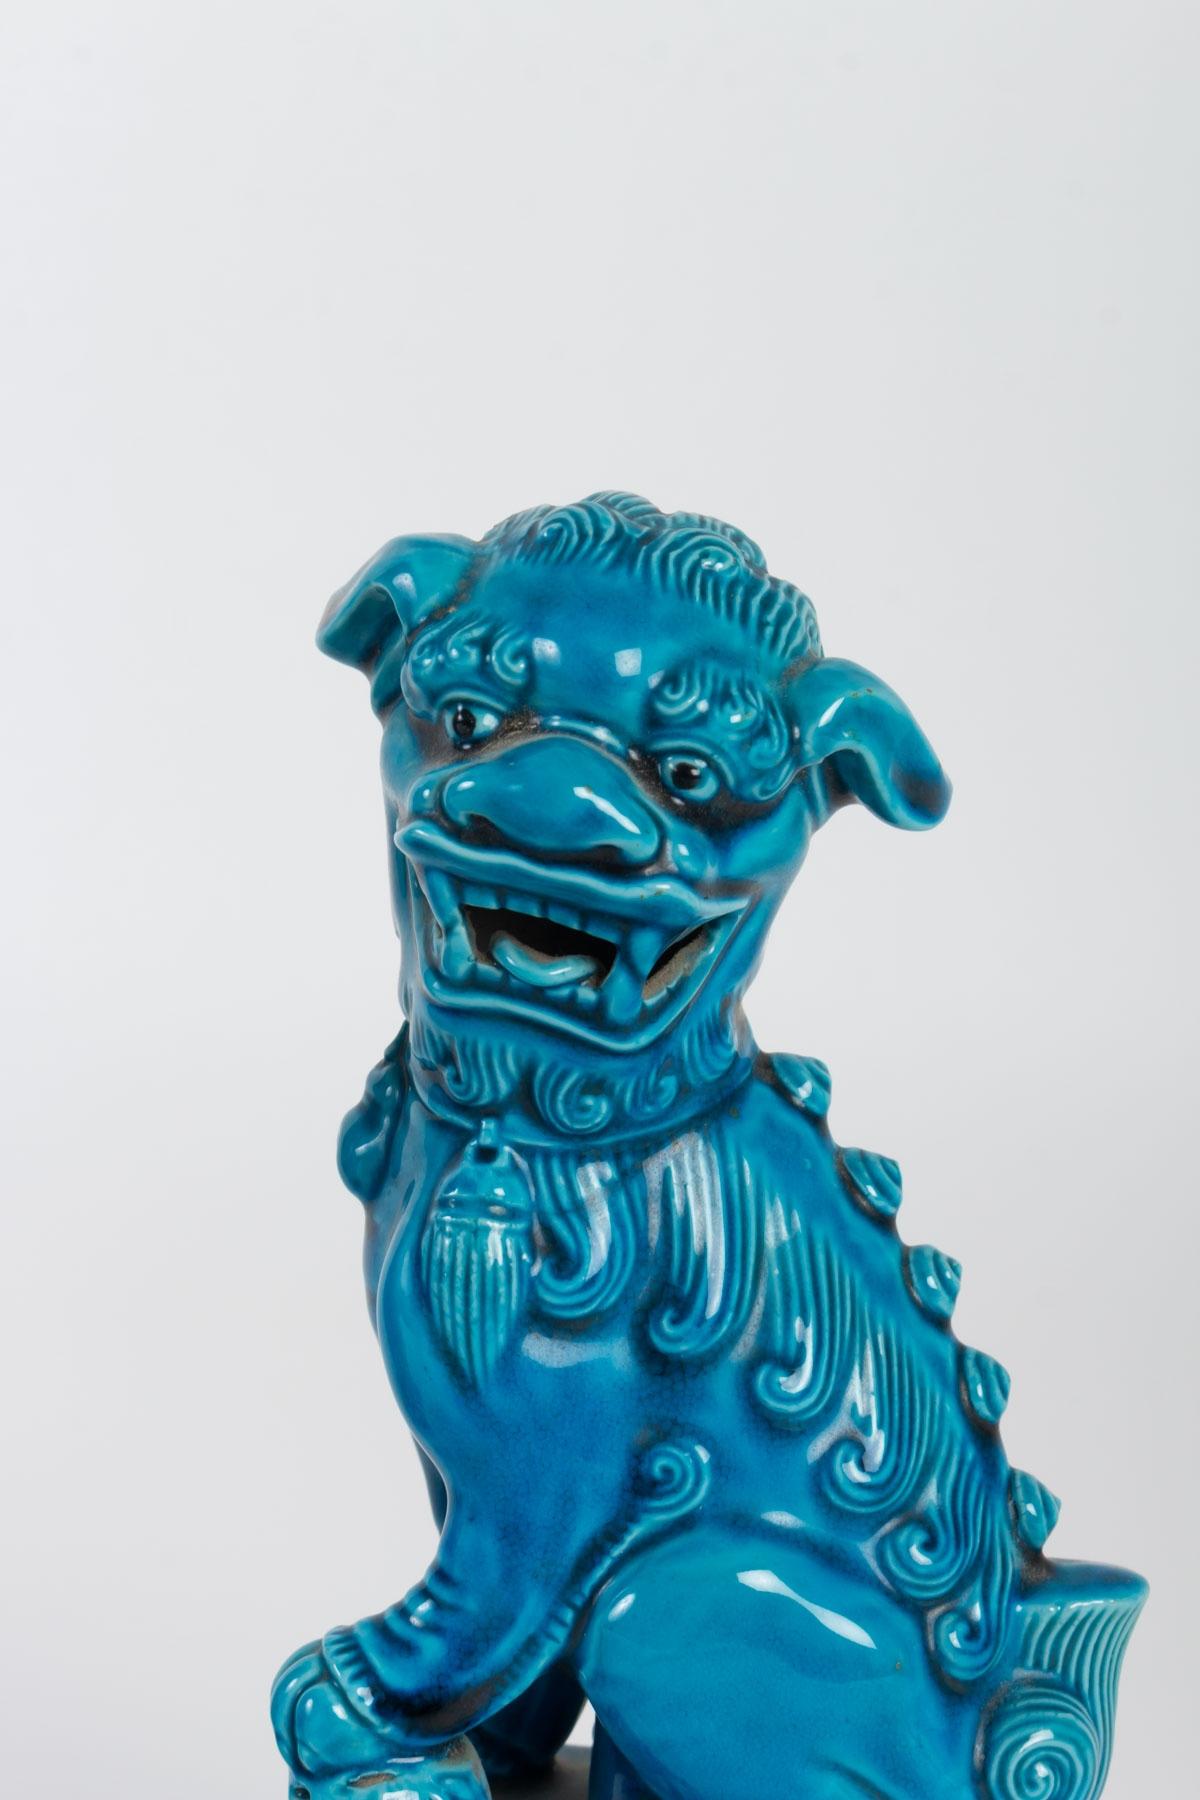 Pair of Fô Dogs in blue porcelain, Chinese work from the end of the 19th century 
Measures: H 18 x L 10 cm.